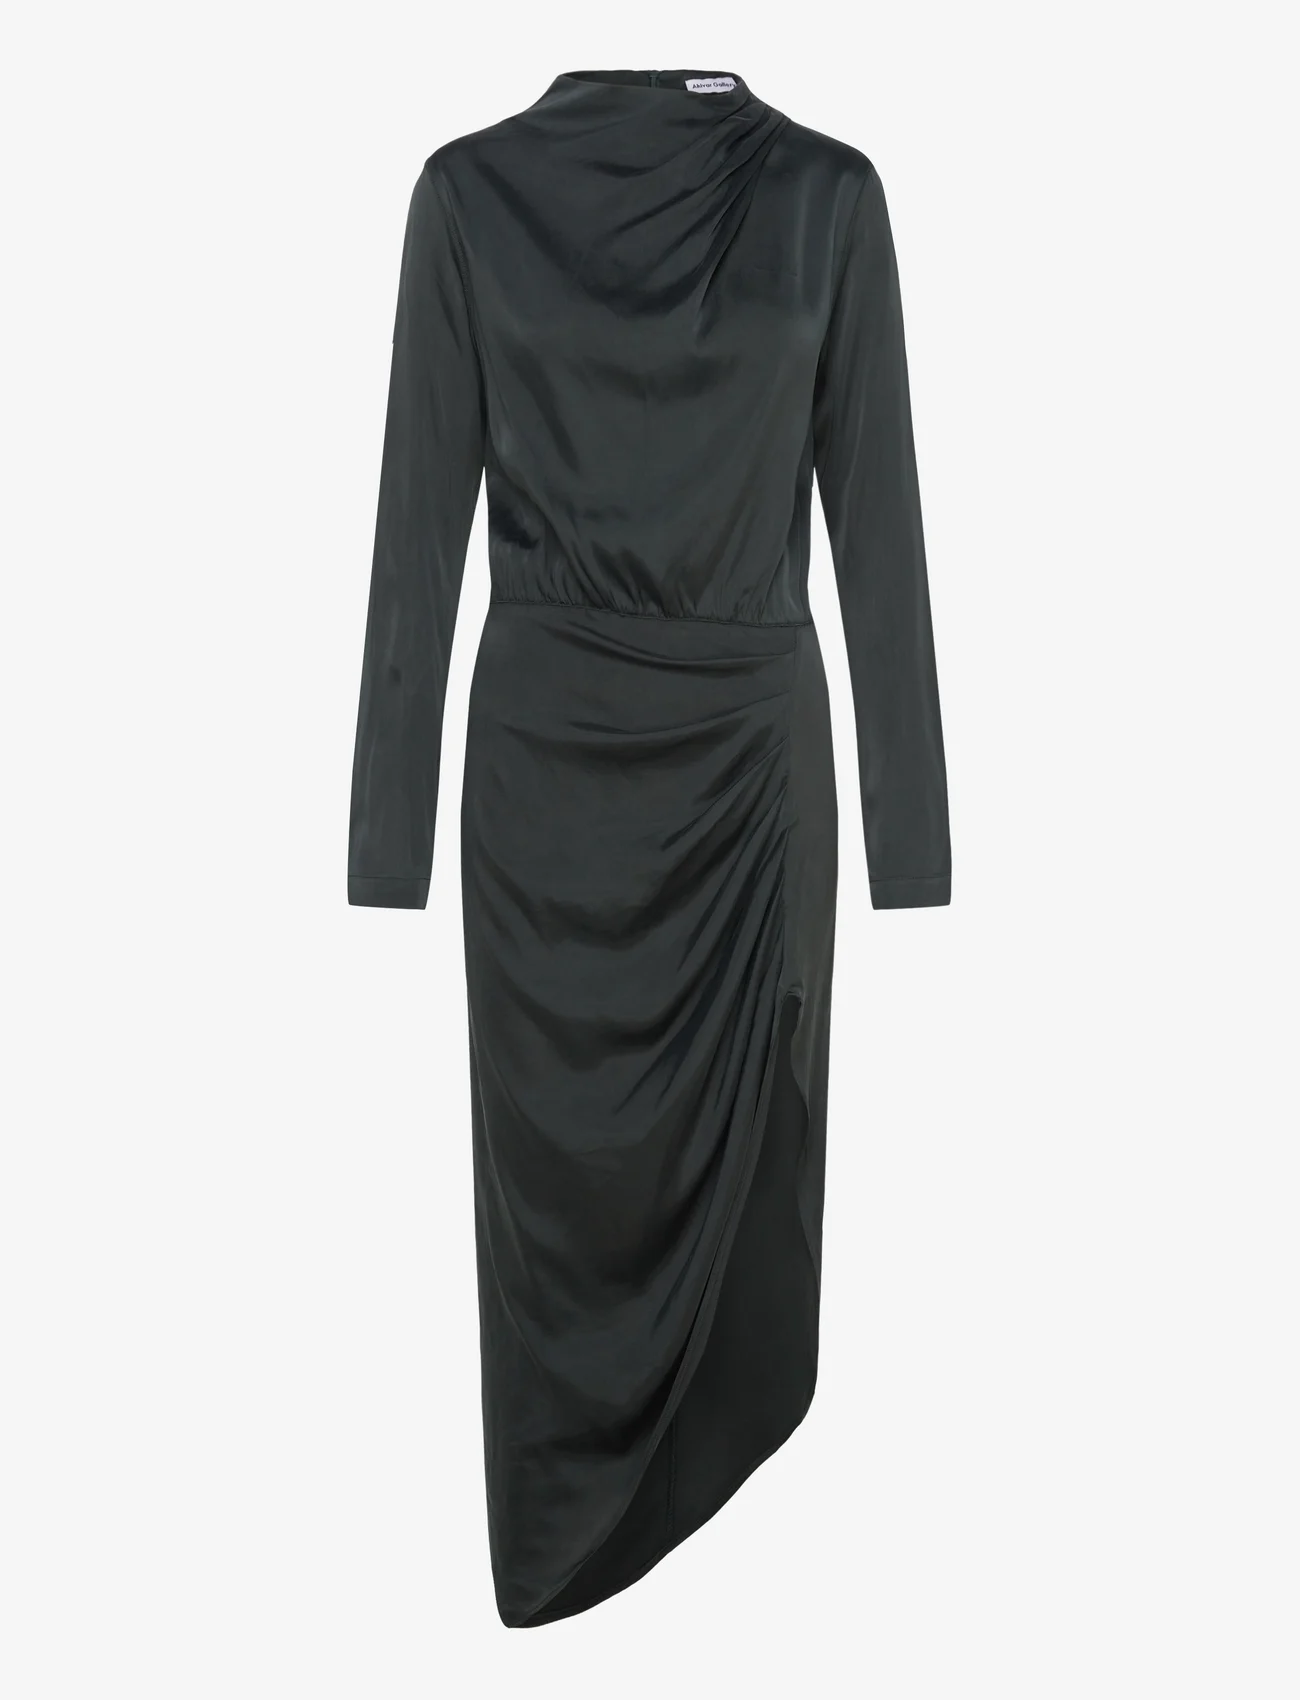 Ahlvar Gallery - Jade dress - party wear at outlet prices - deep forest - 0